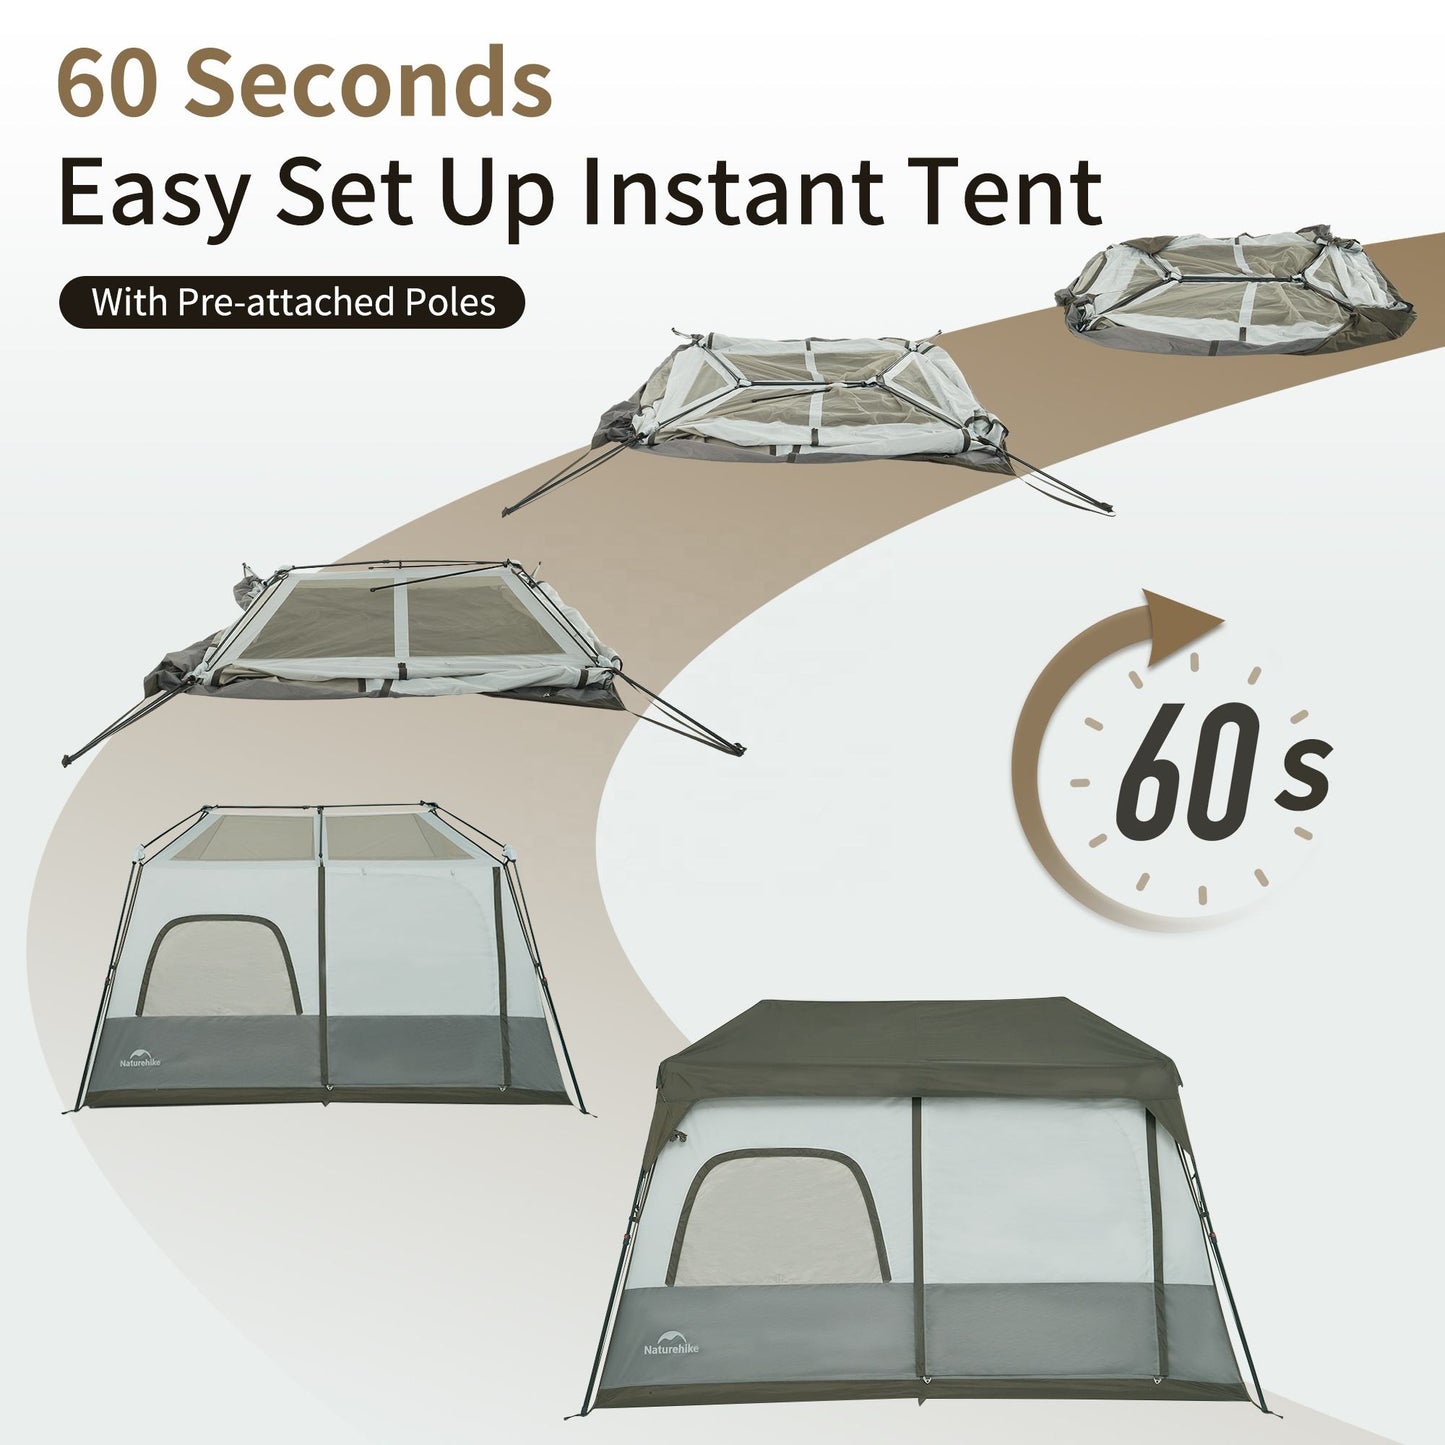 Naturehike CAPE 8.3 Fast Automatic Tent 8.3m² Interior Space Cabin Style 1 Bedroom 3 Door Tent for up to 4-6 Person Outdoor Camping Waterproof Windproof 60s Quick Build Auto Poles Nature Hike village